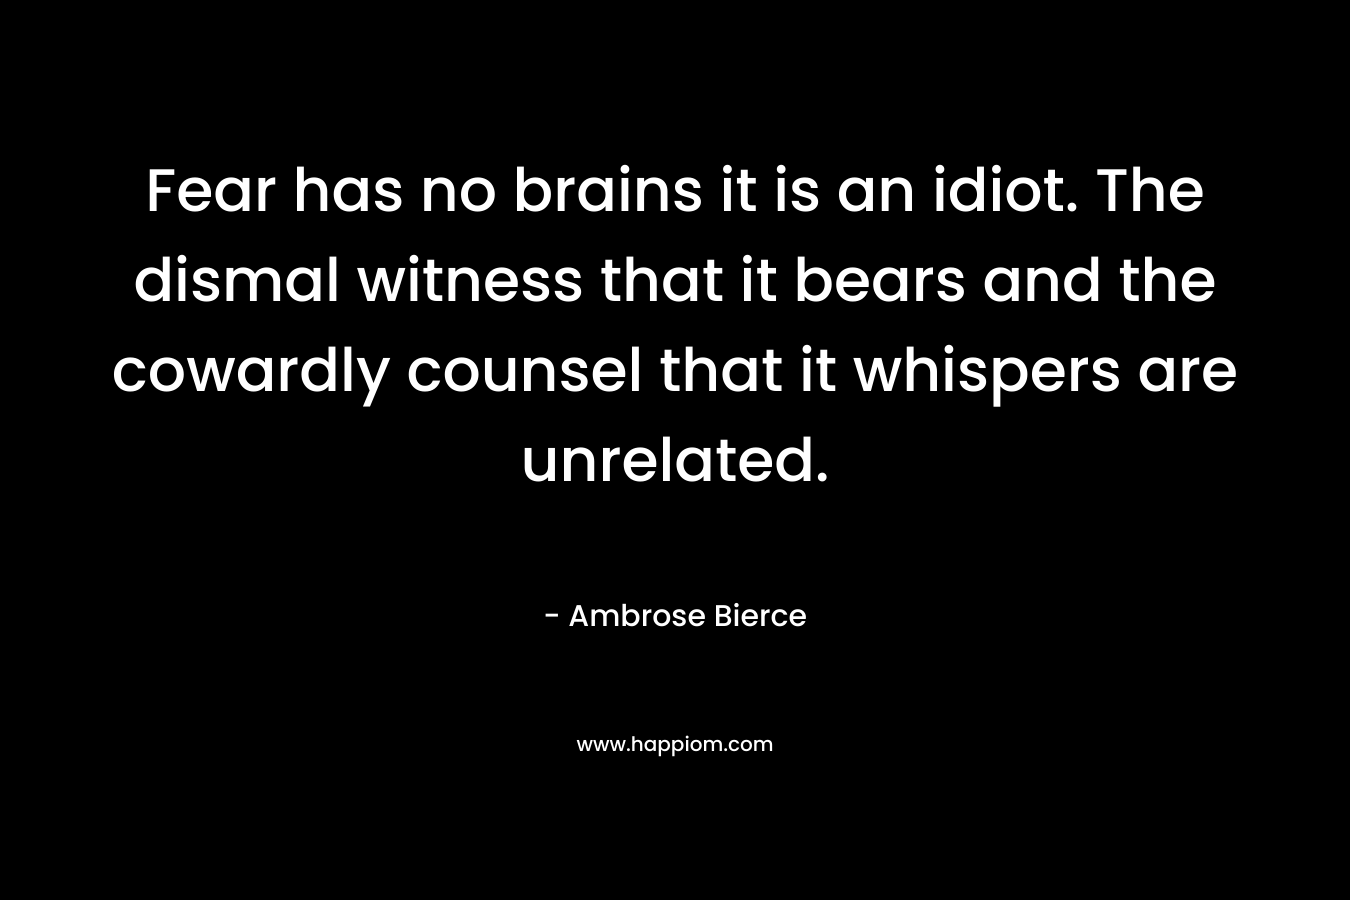 Fear has no brains it is an idiot. The dismal witness that it bears and the cowardly counsel that it whispers are unrelated. 